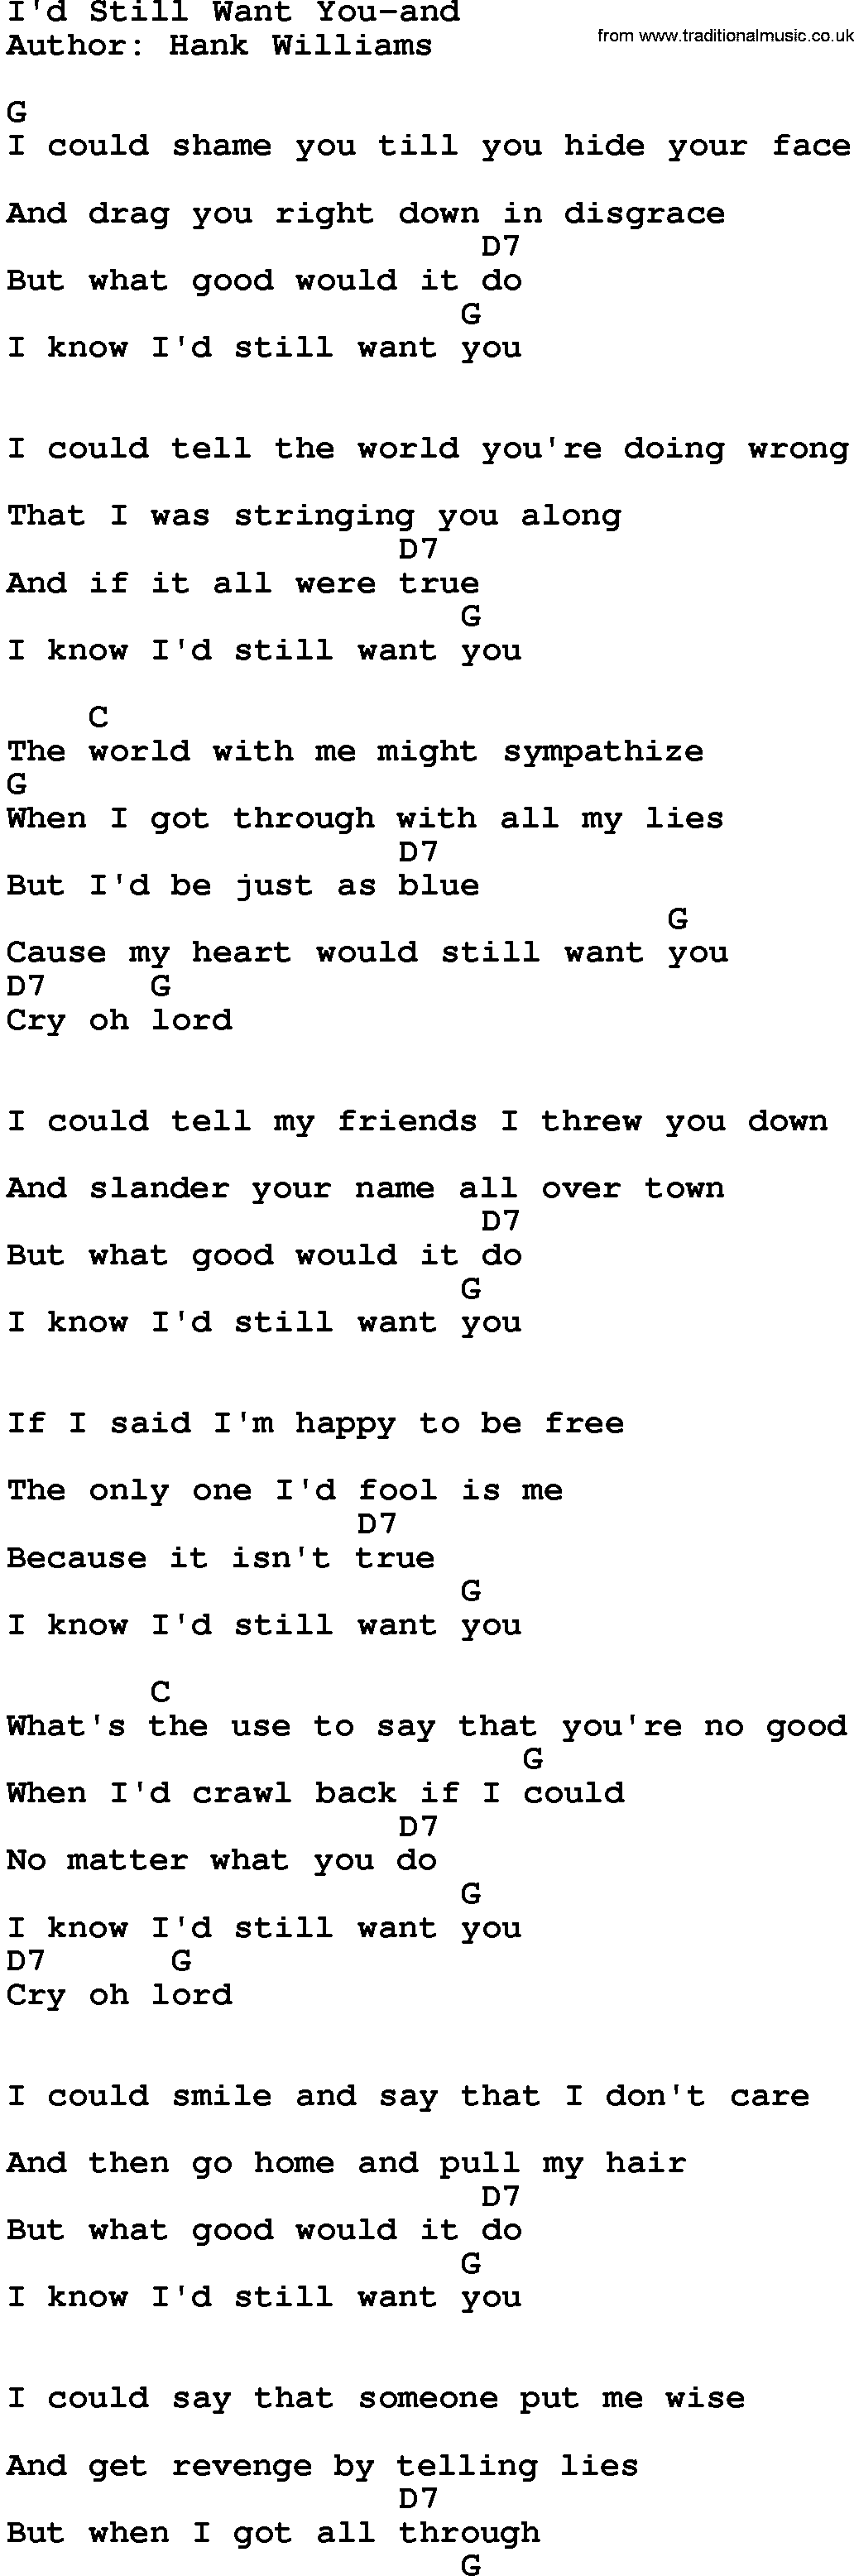 Country music song: I'd Still Want You-And lyrics and chords